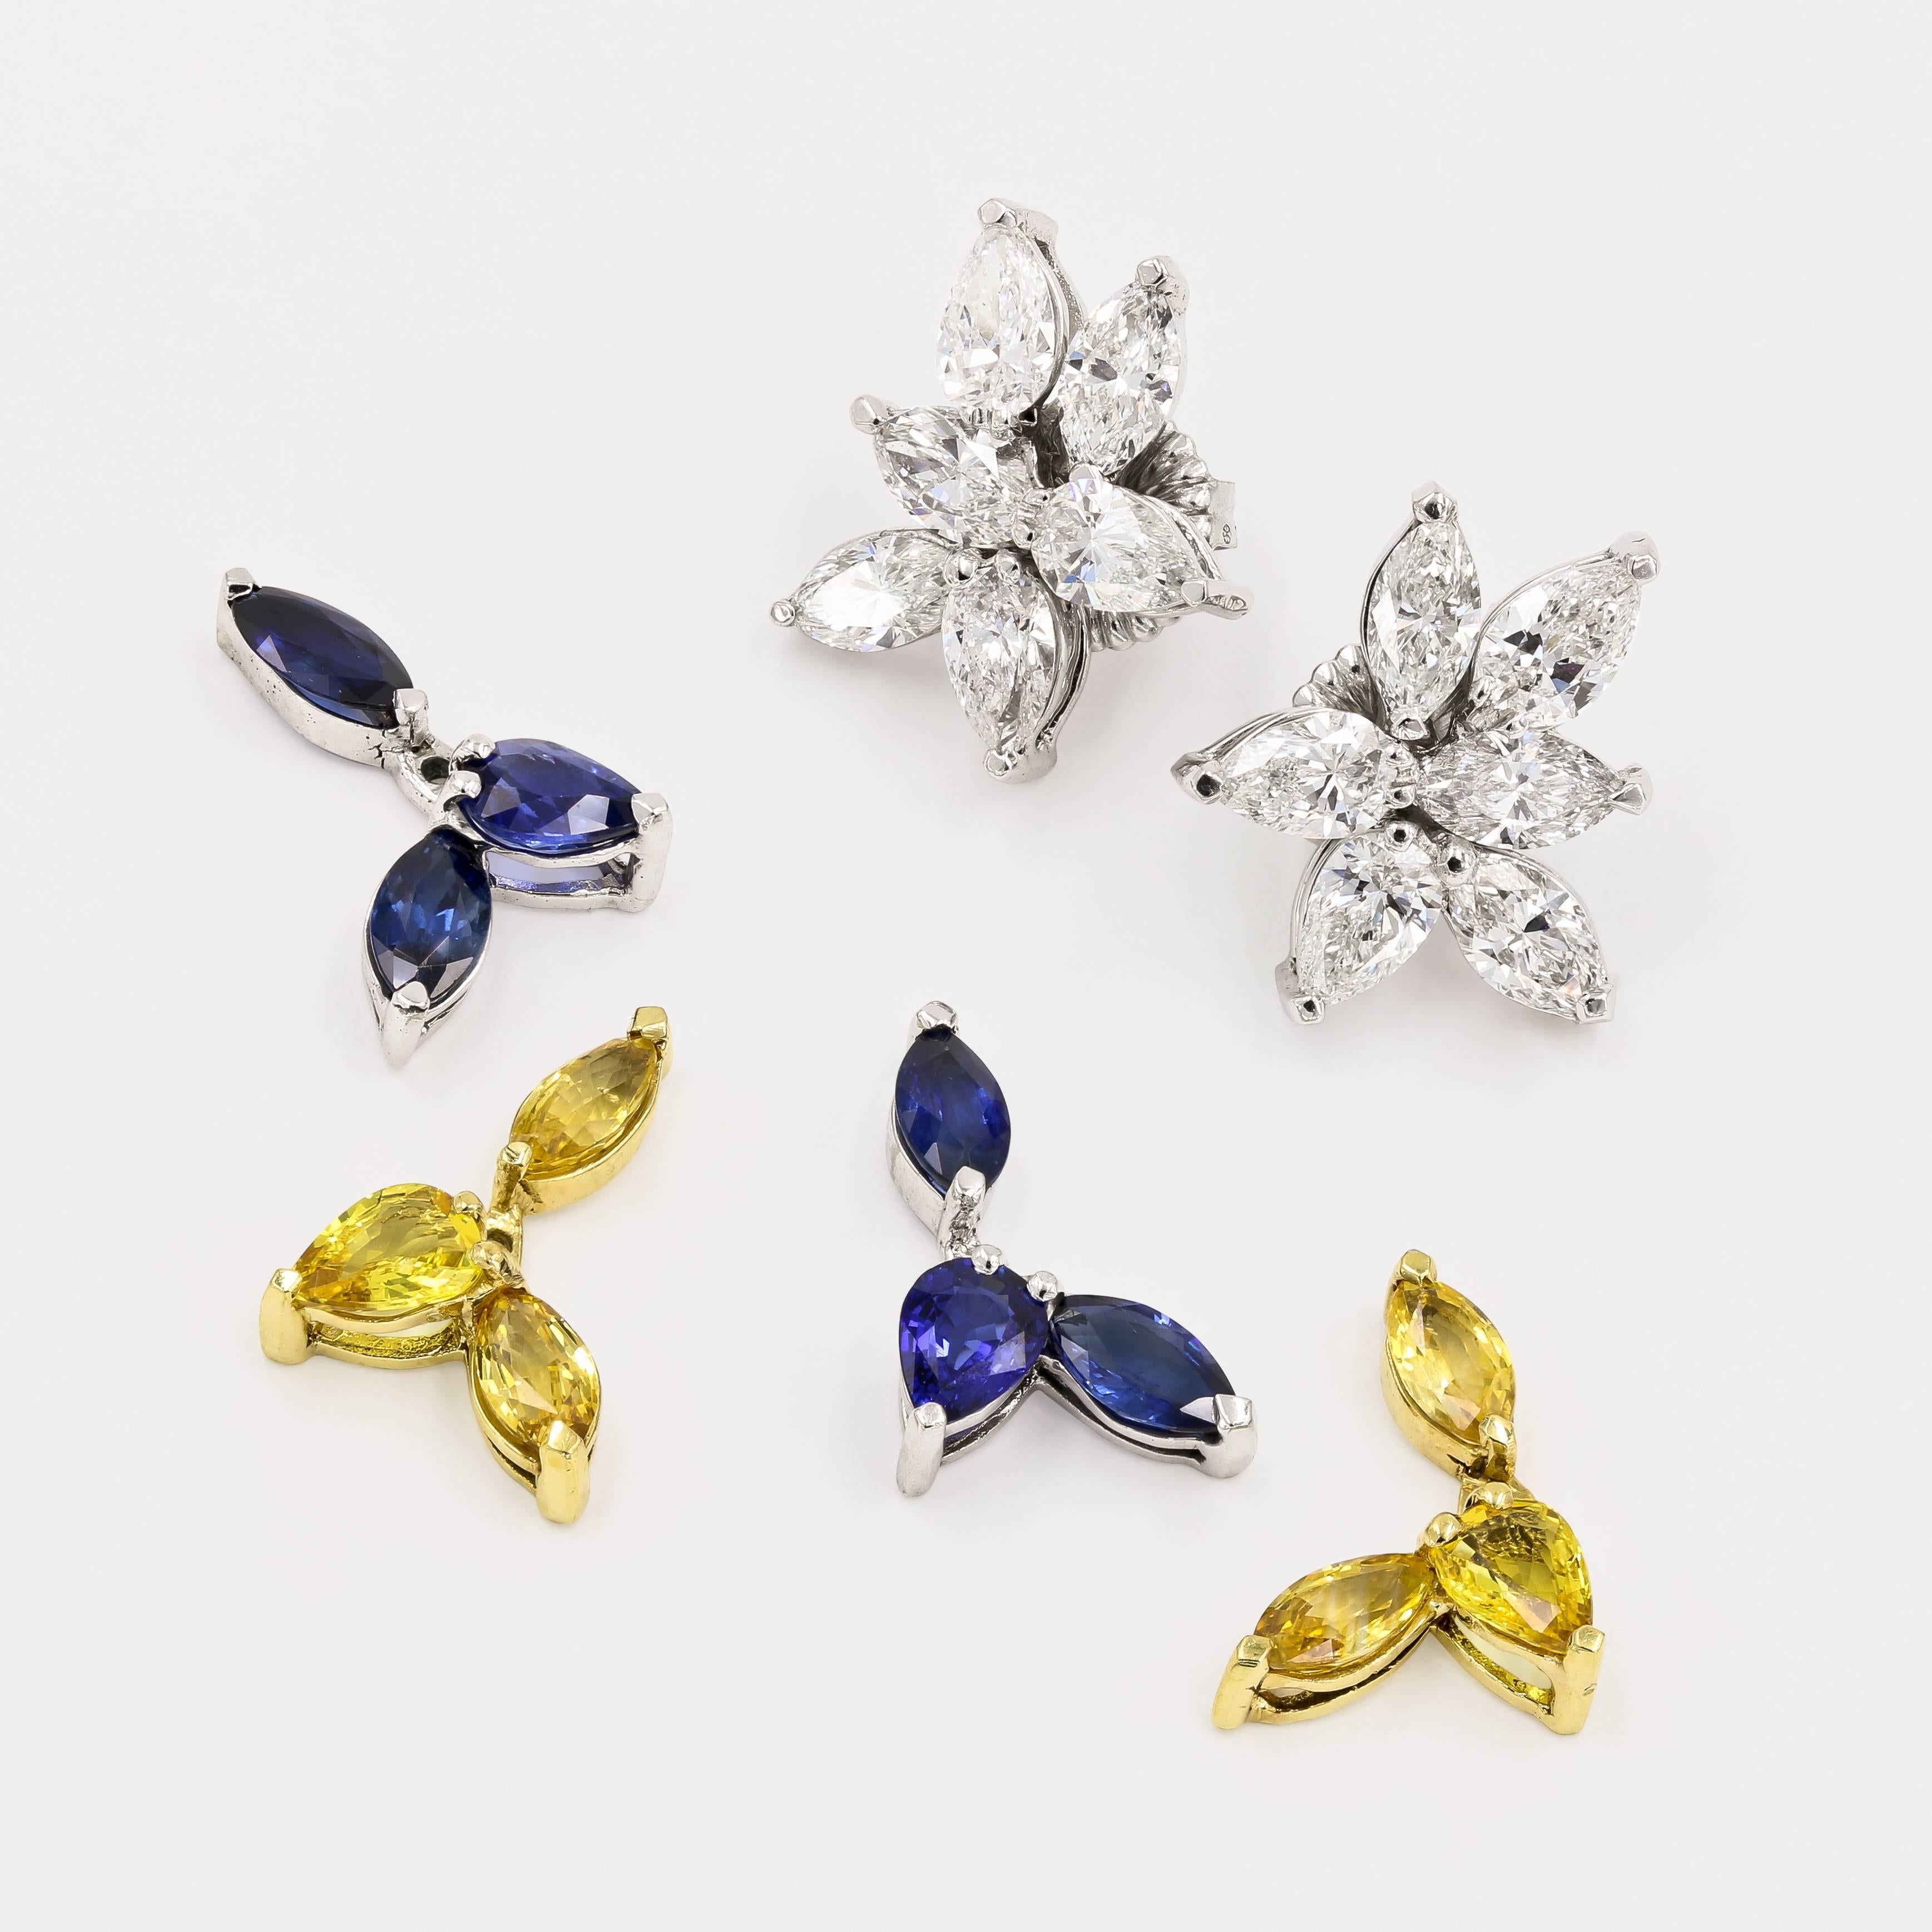 Women's Diamond and Sapphire Earrings with Interchangeable Stones in 18kt Gold